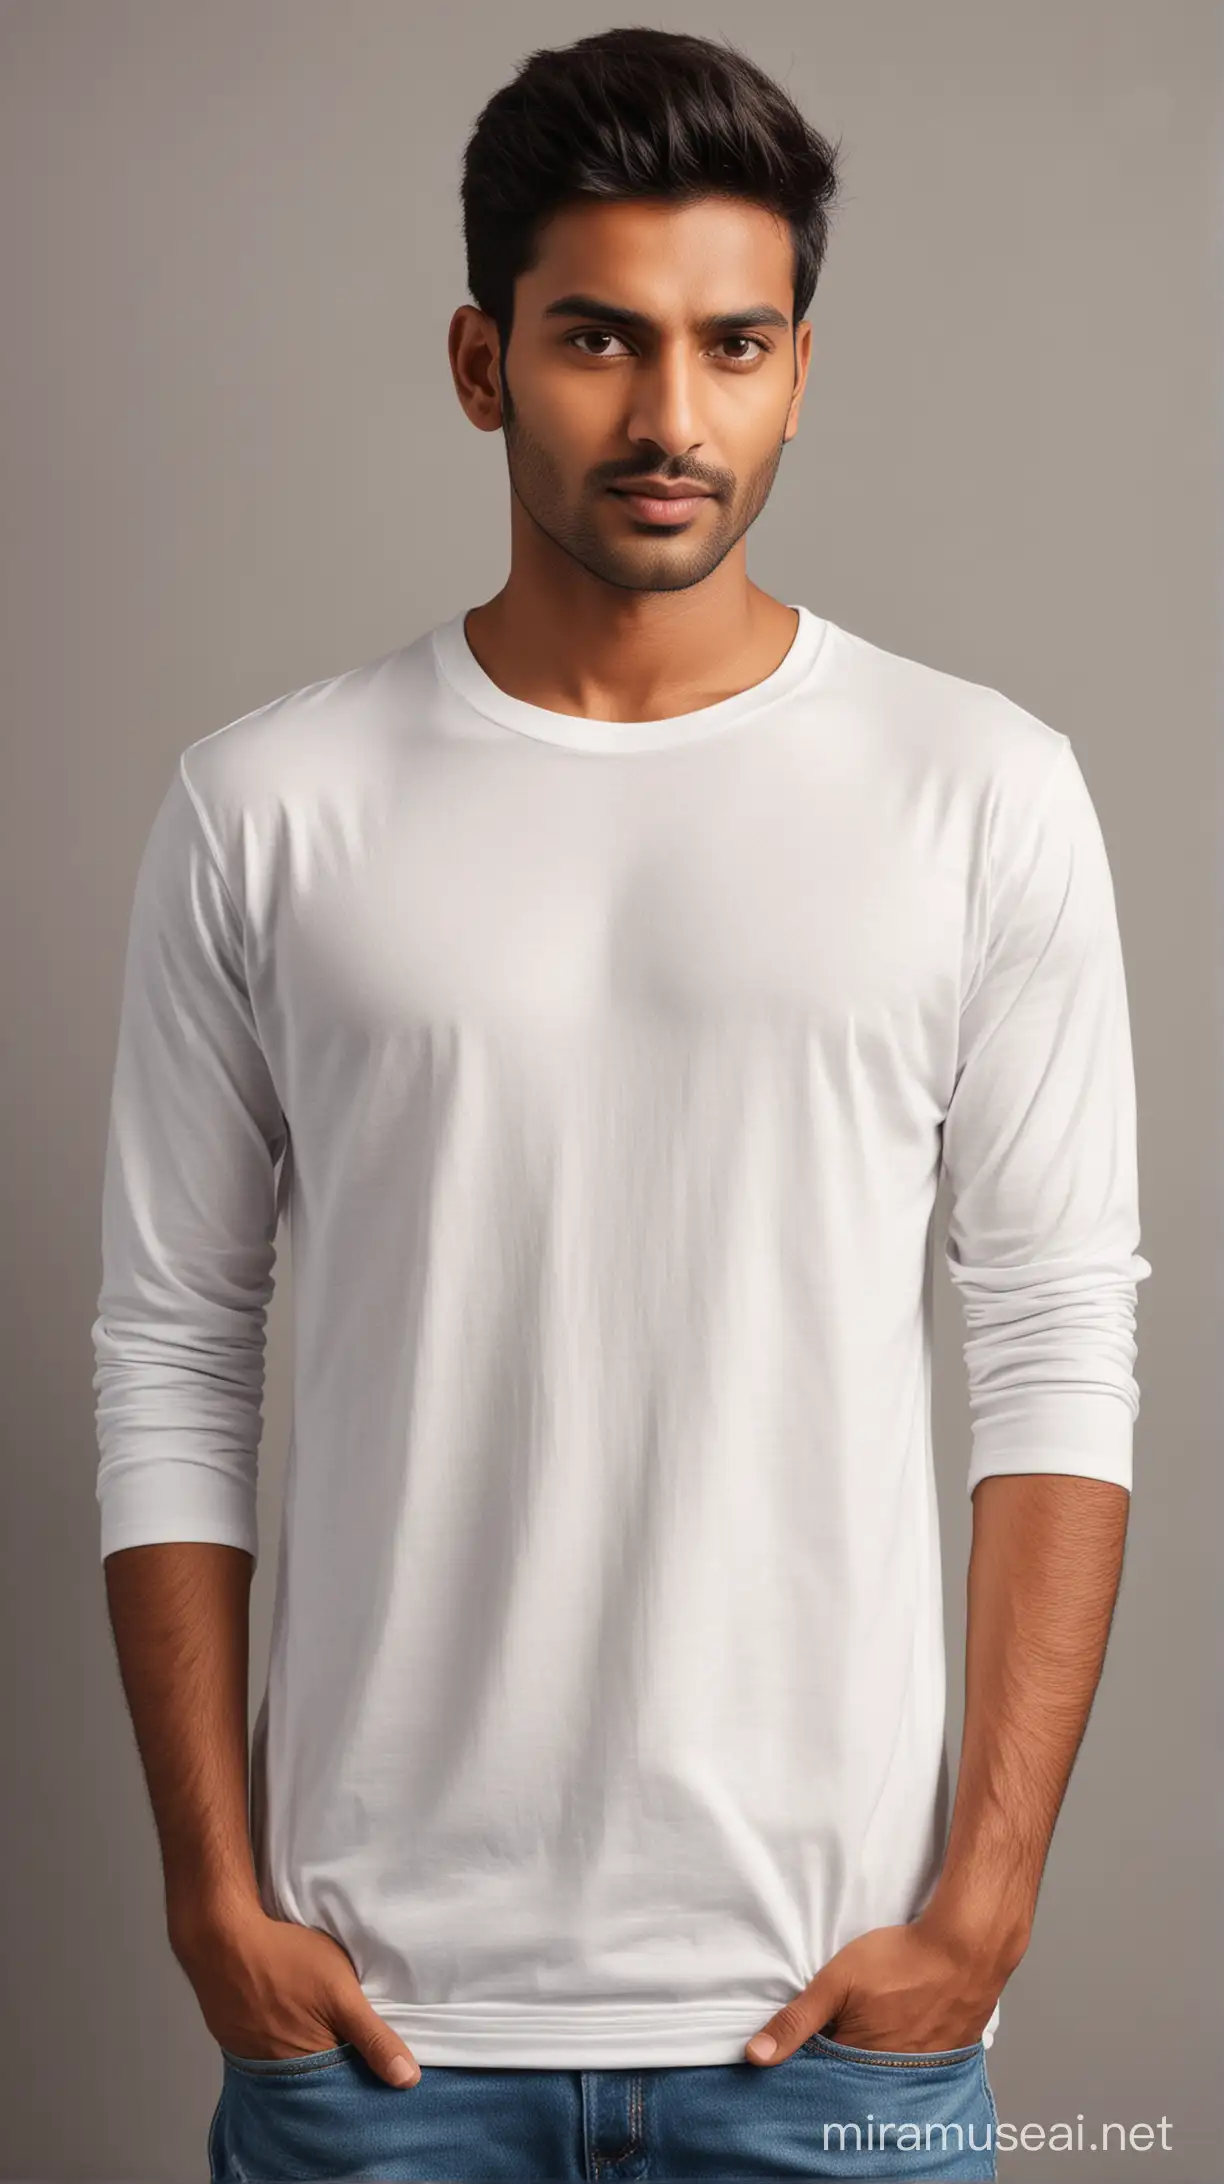 Indian men with t shirt 